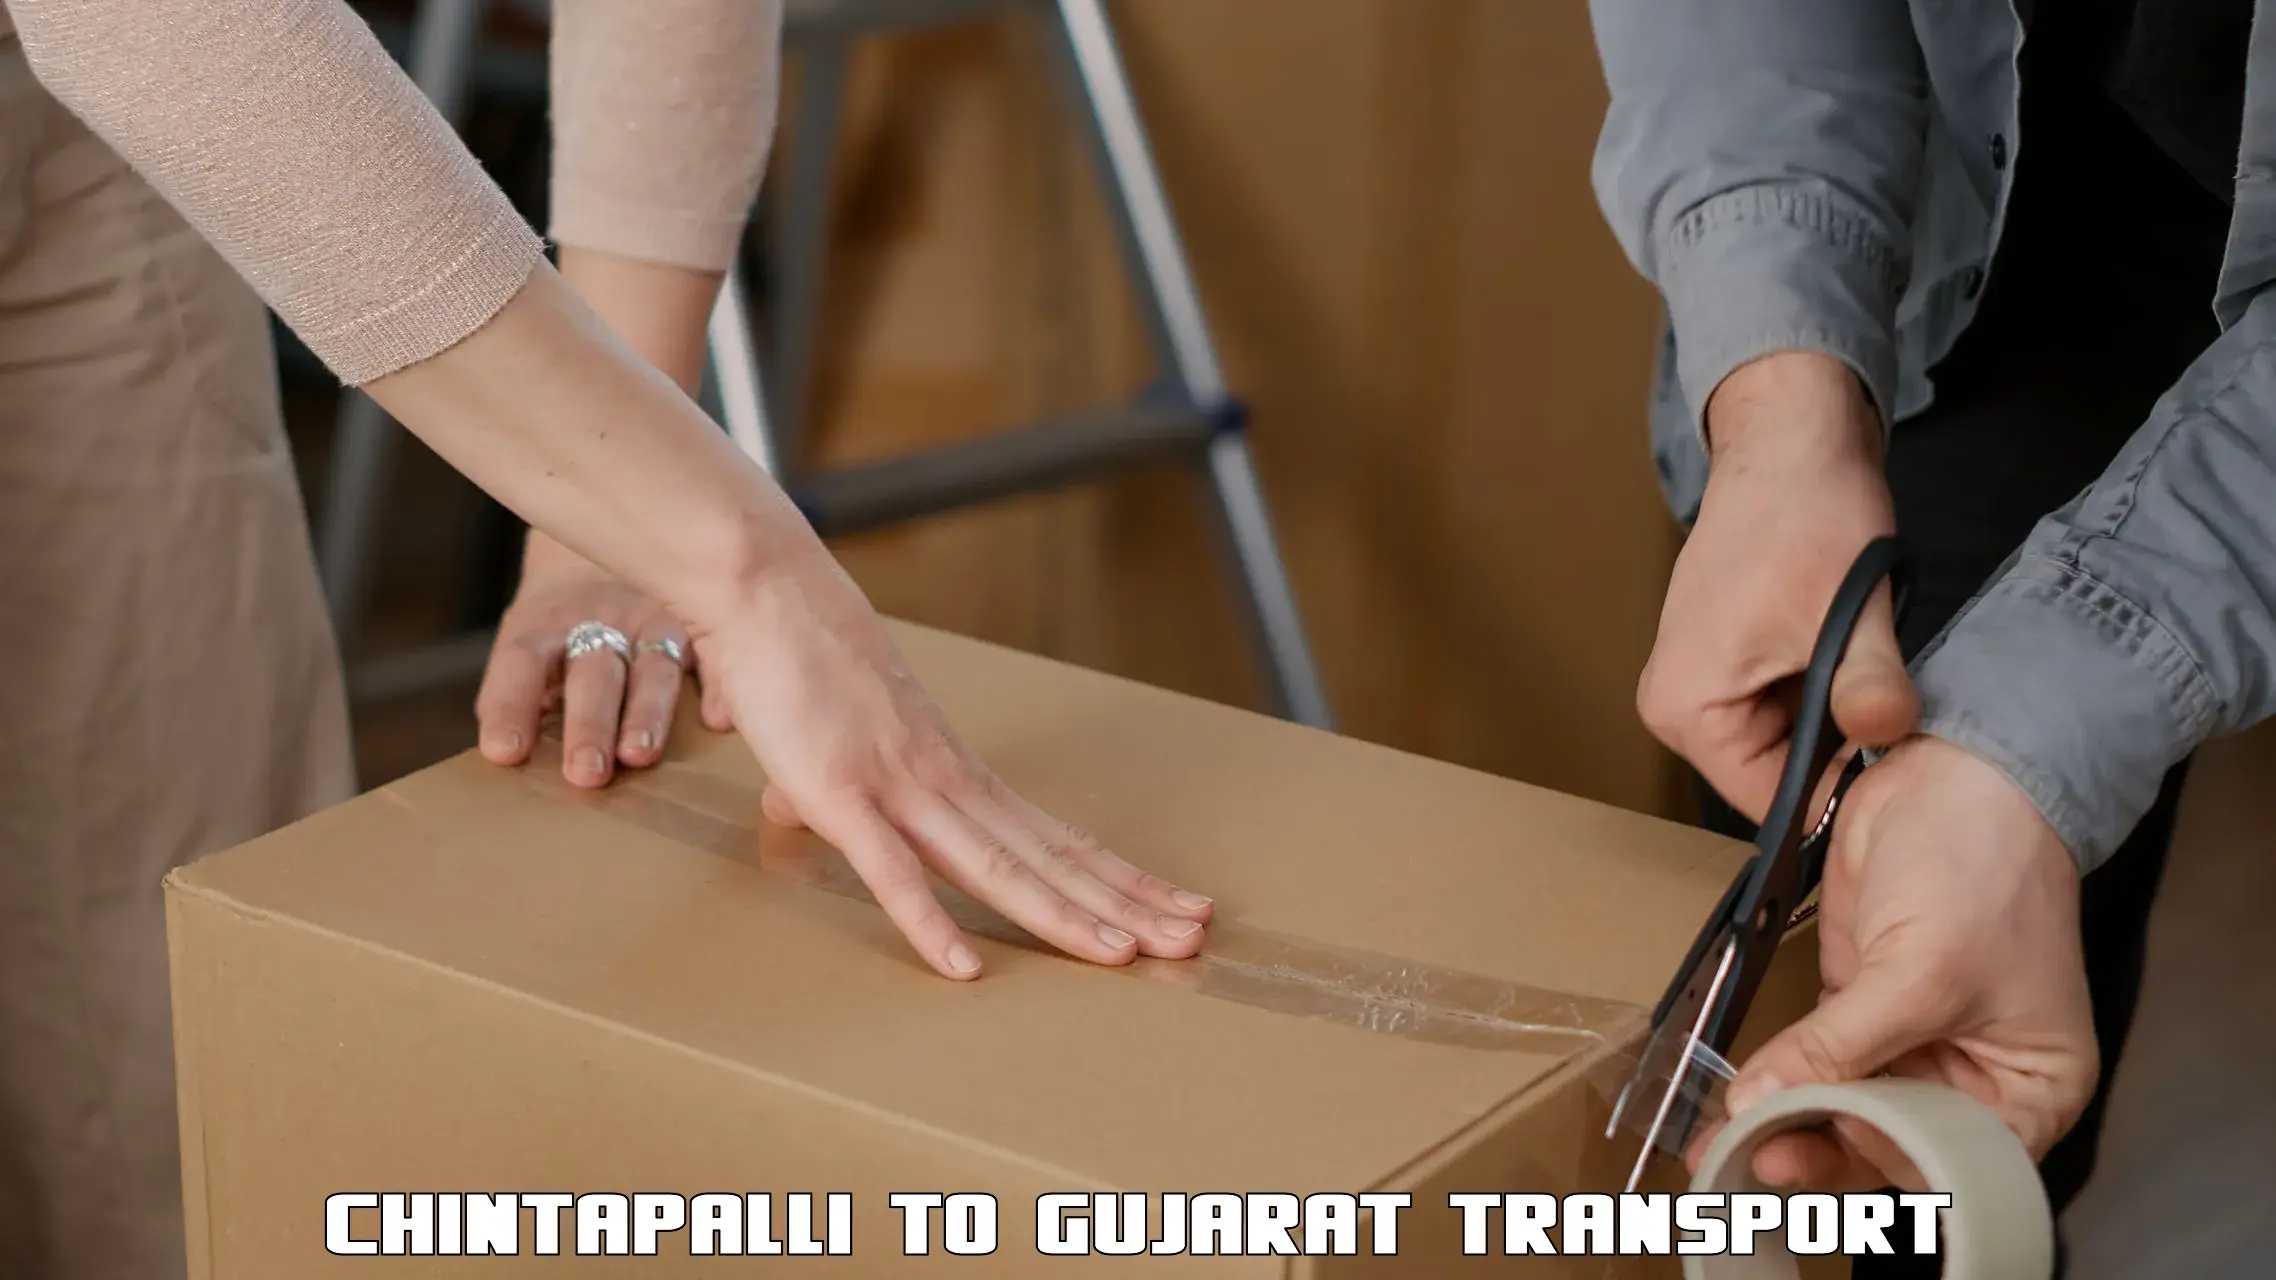 Delivery service Chintapalli to Gujarat